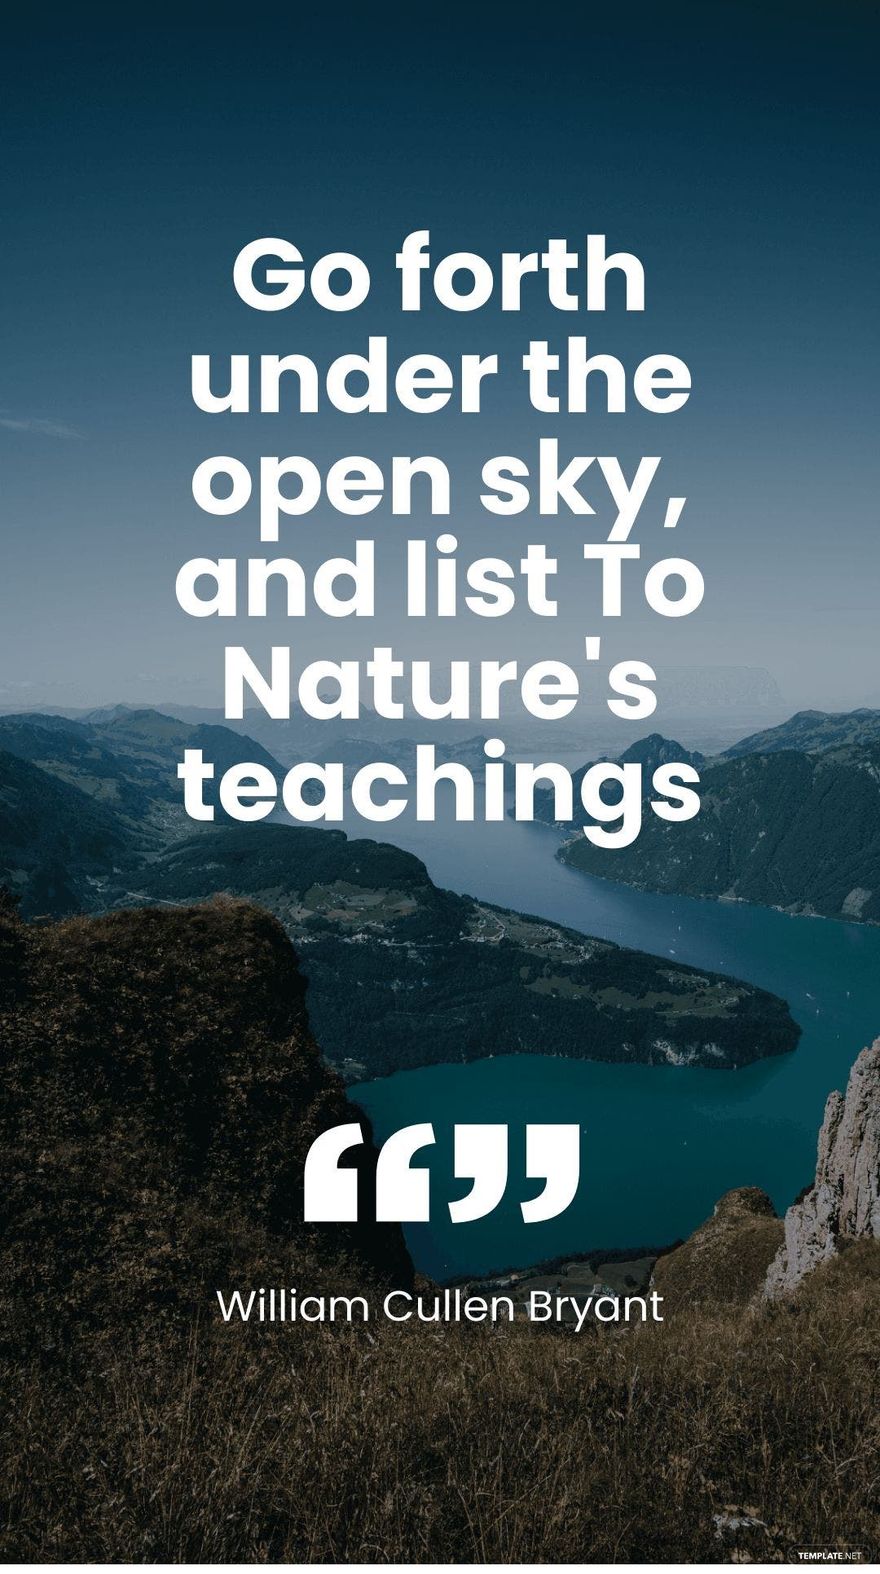 Free William Cullen Bryant - Go forth under the open sky, and list To Nature's teachings. in JPG